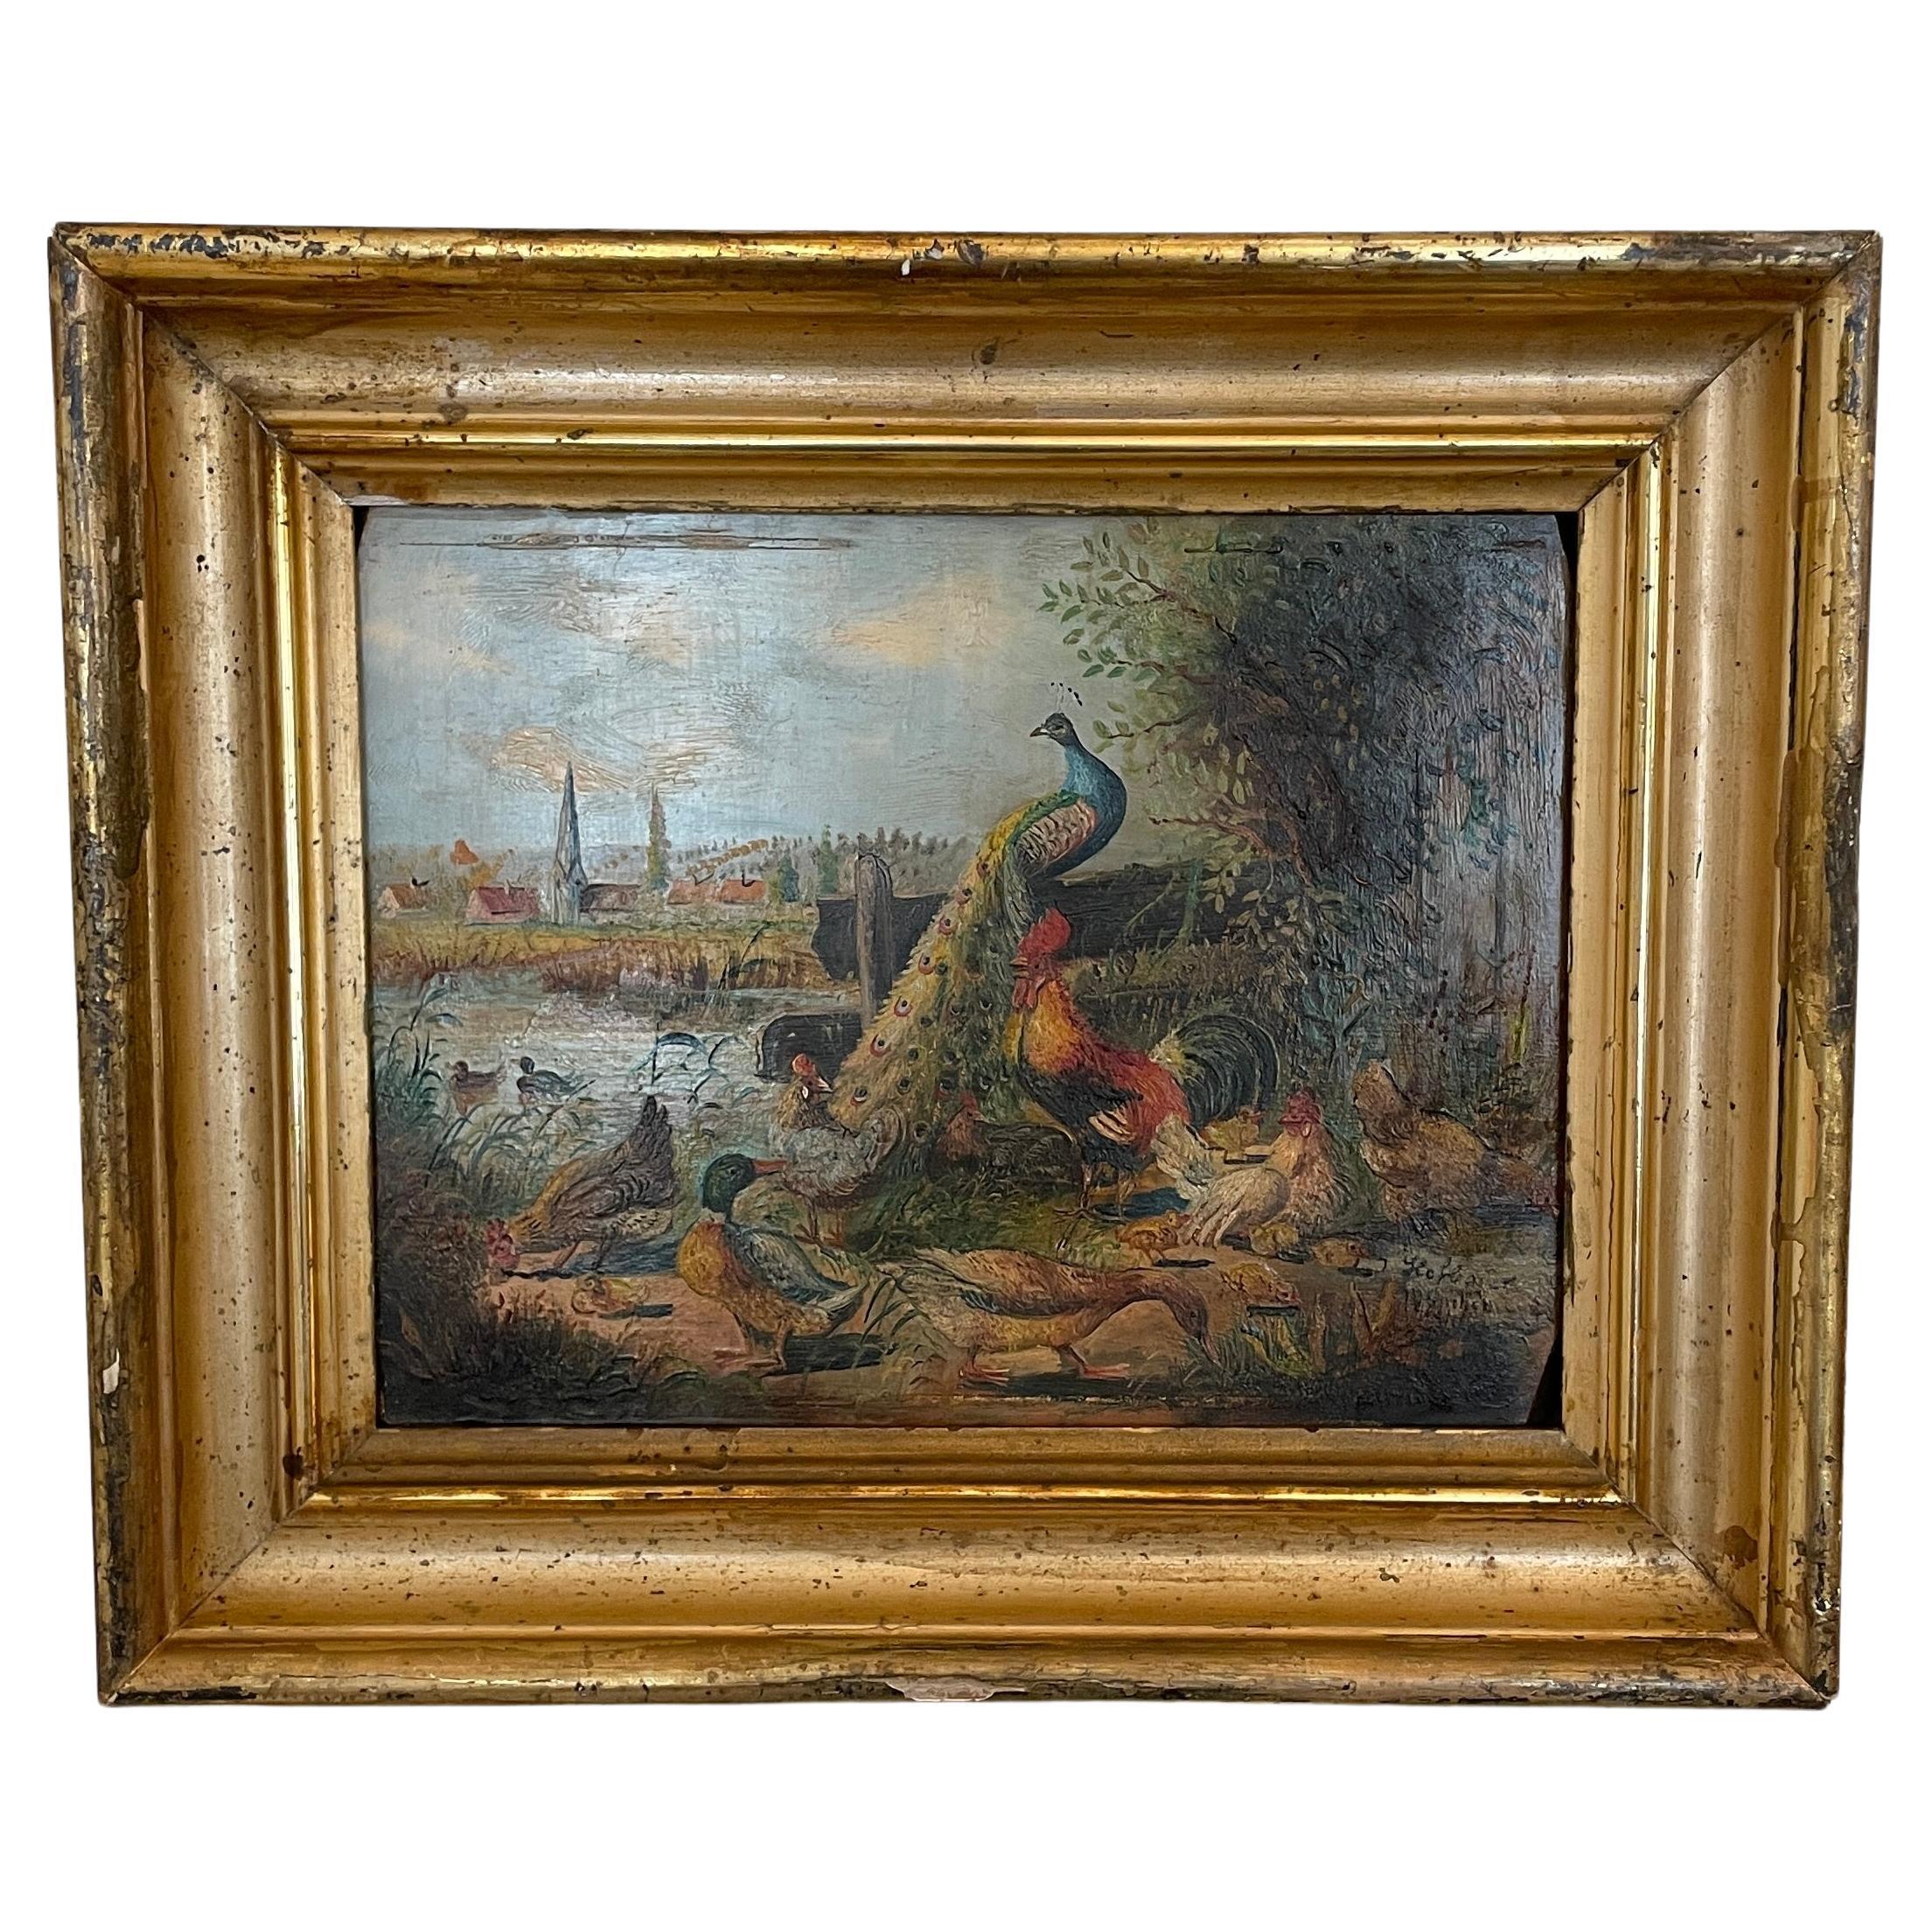 1950s German Oil Painting on Wood in an Old Gilded Frame by Josef Hofbauer For Sale